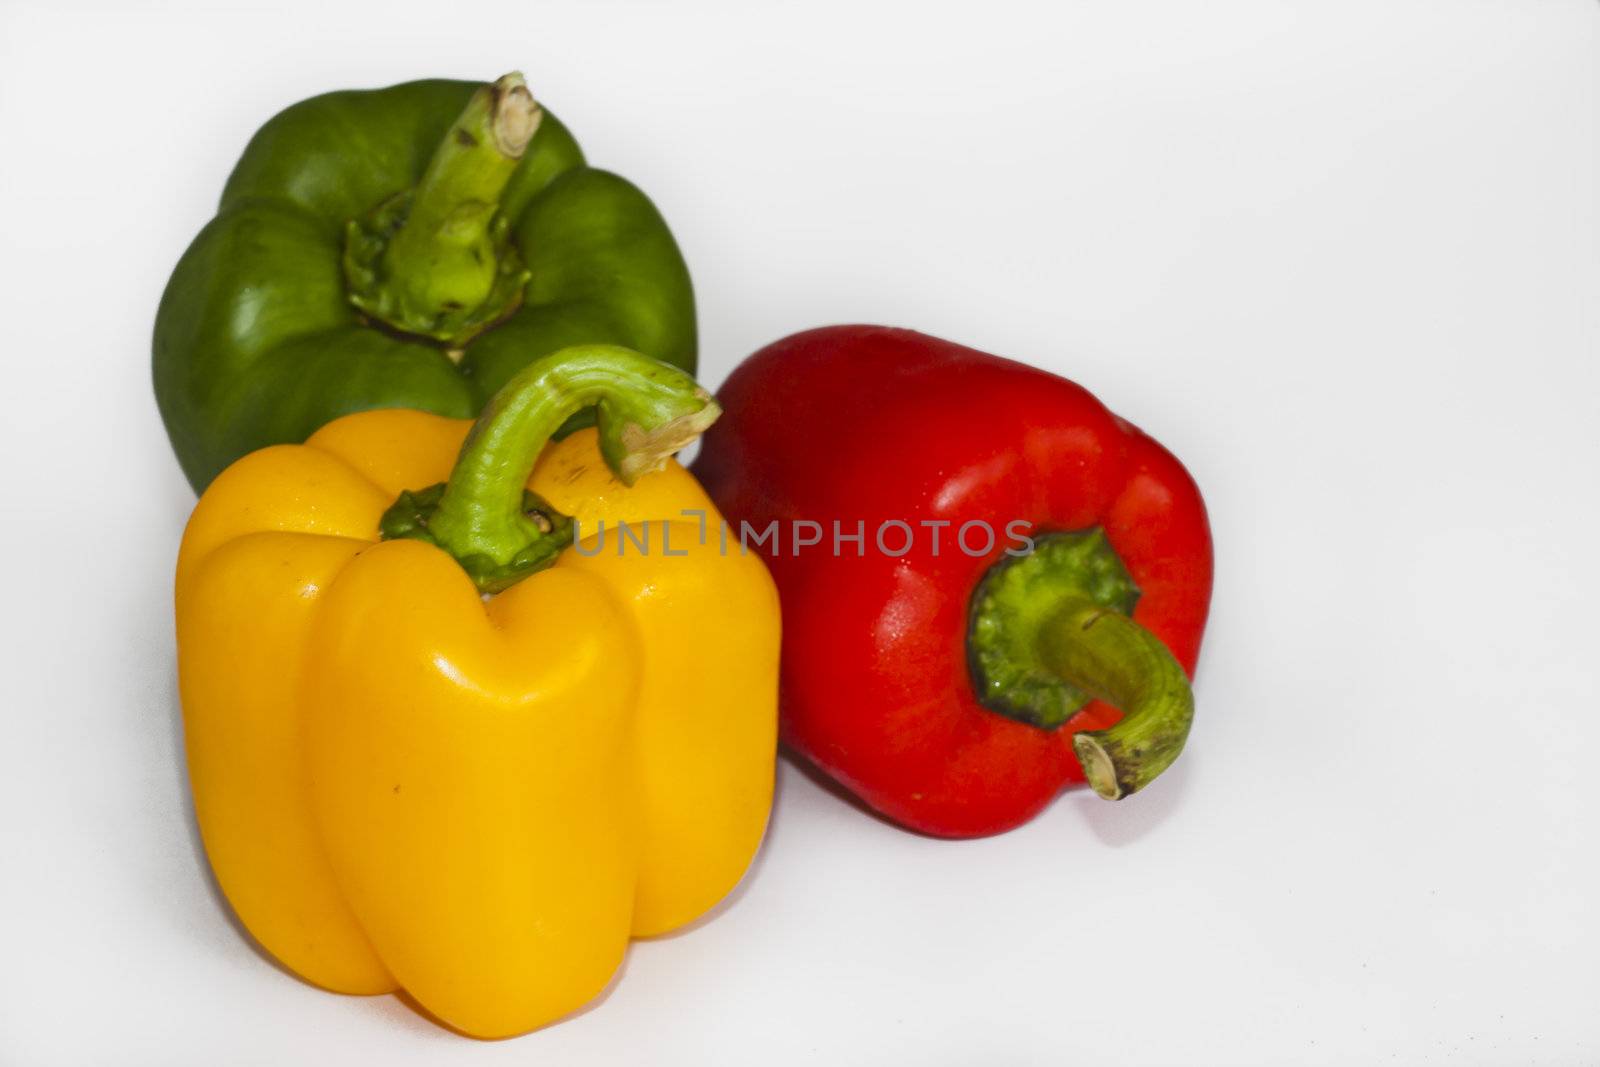 A collection of three main colors of pepper